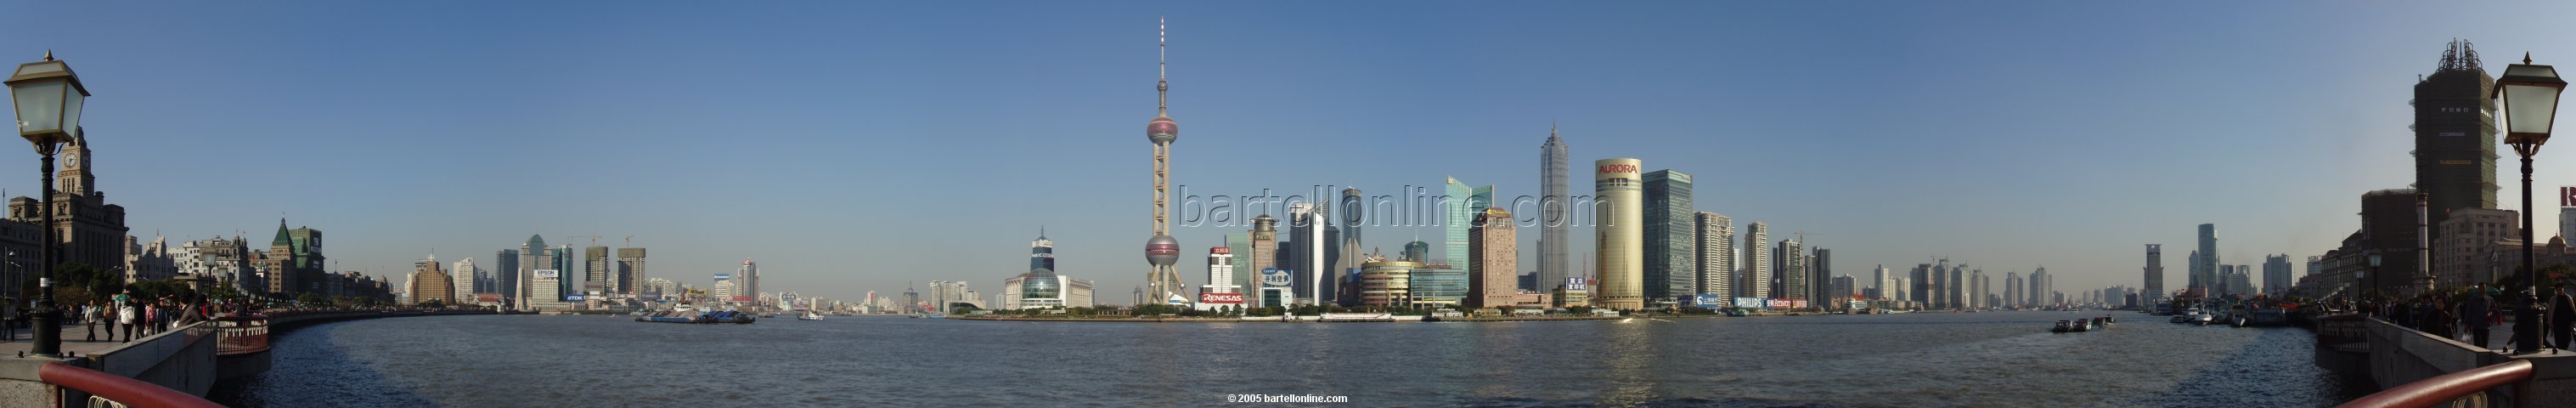 Panorama of the Huangpu river and Pudong, China as seen from The Bund in Shanghai